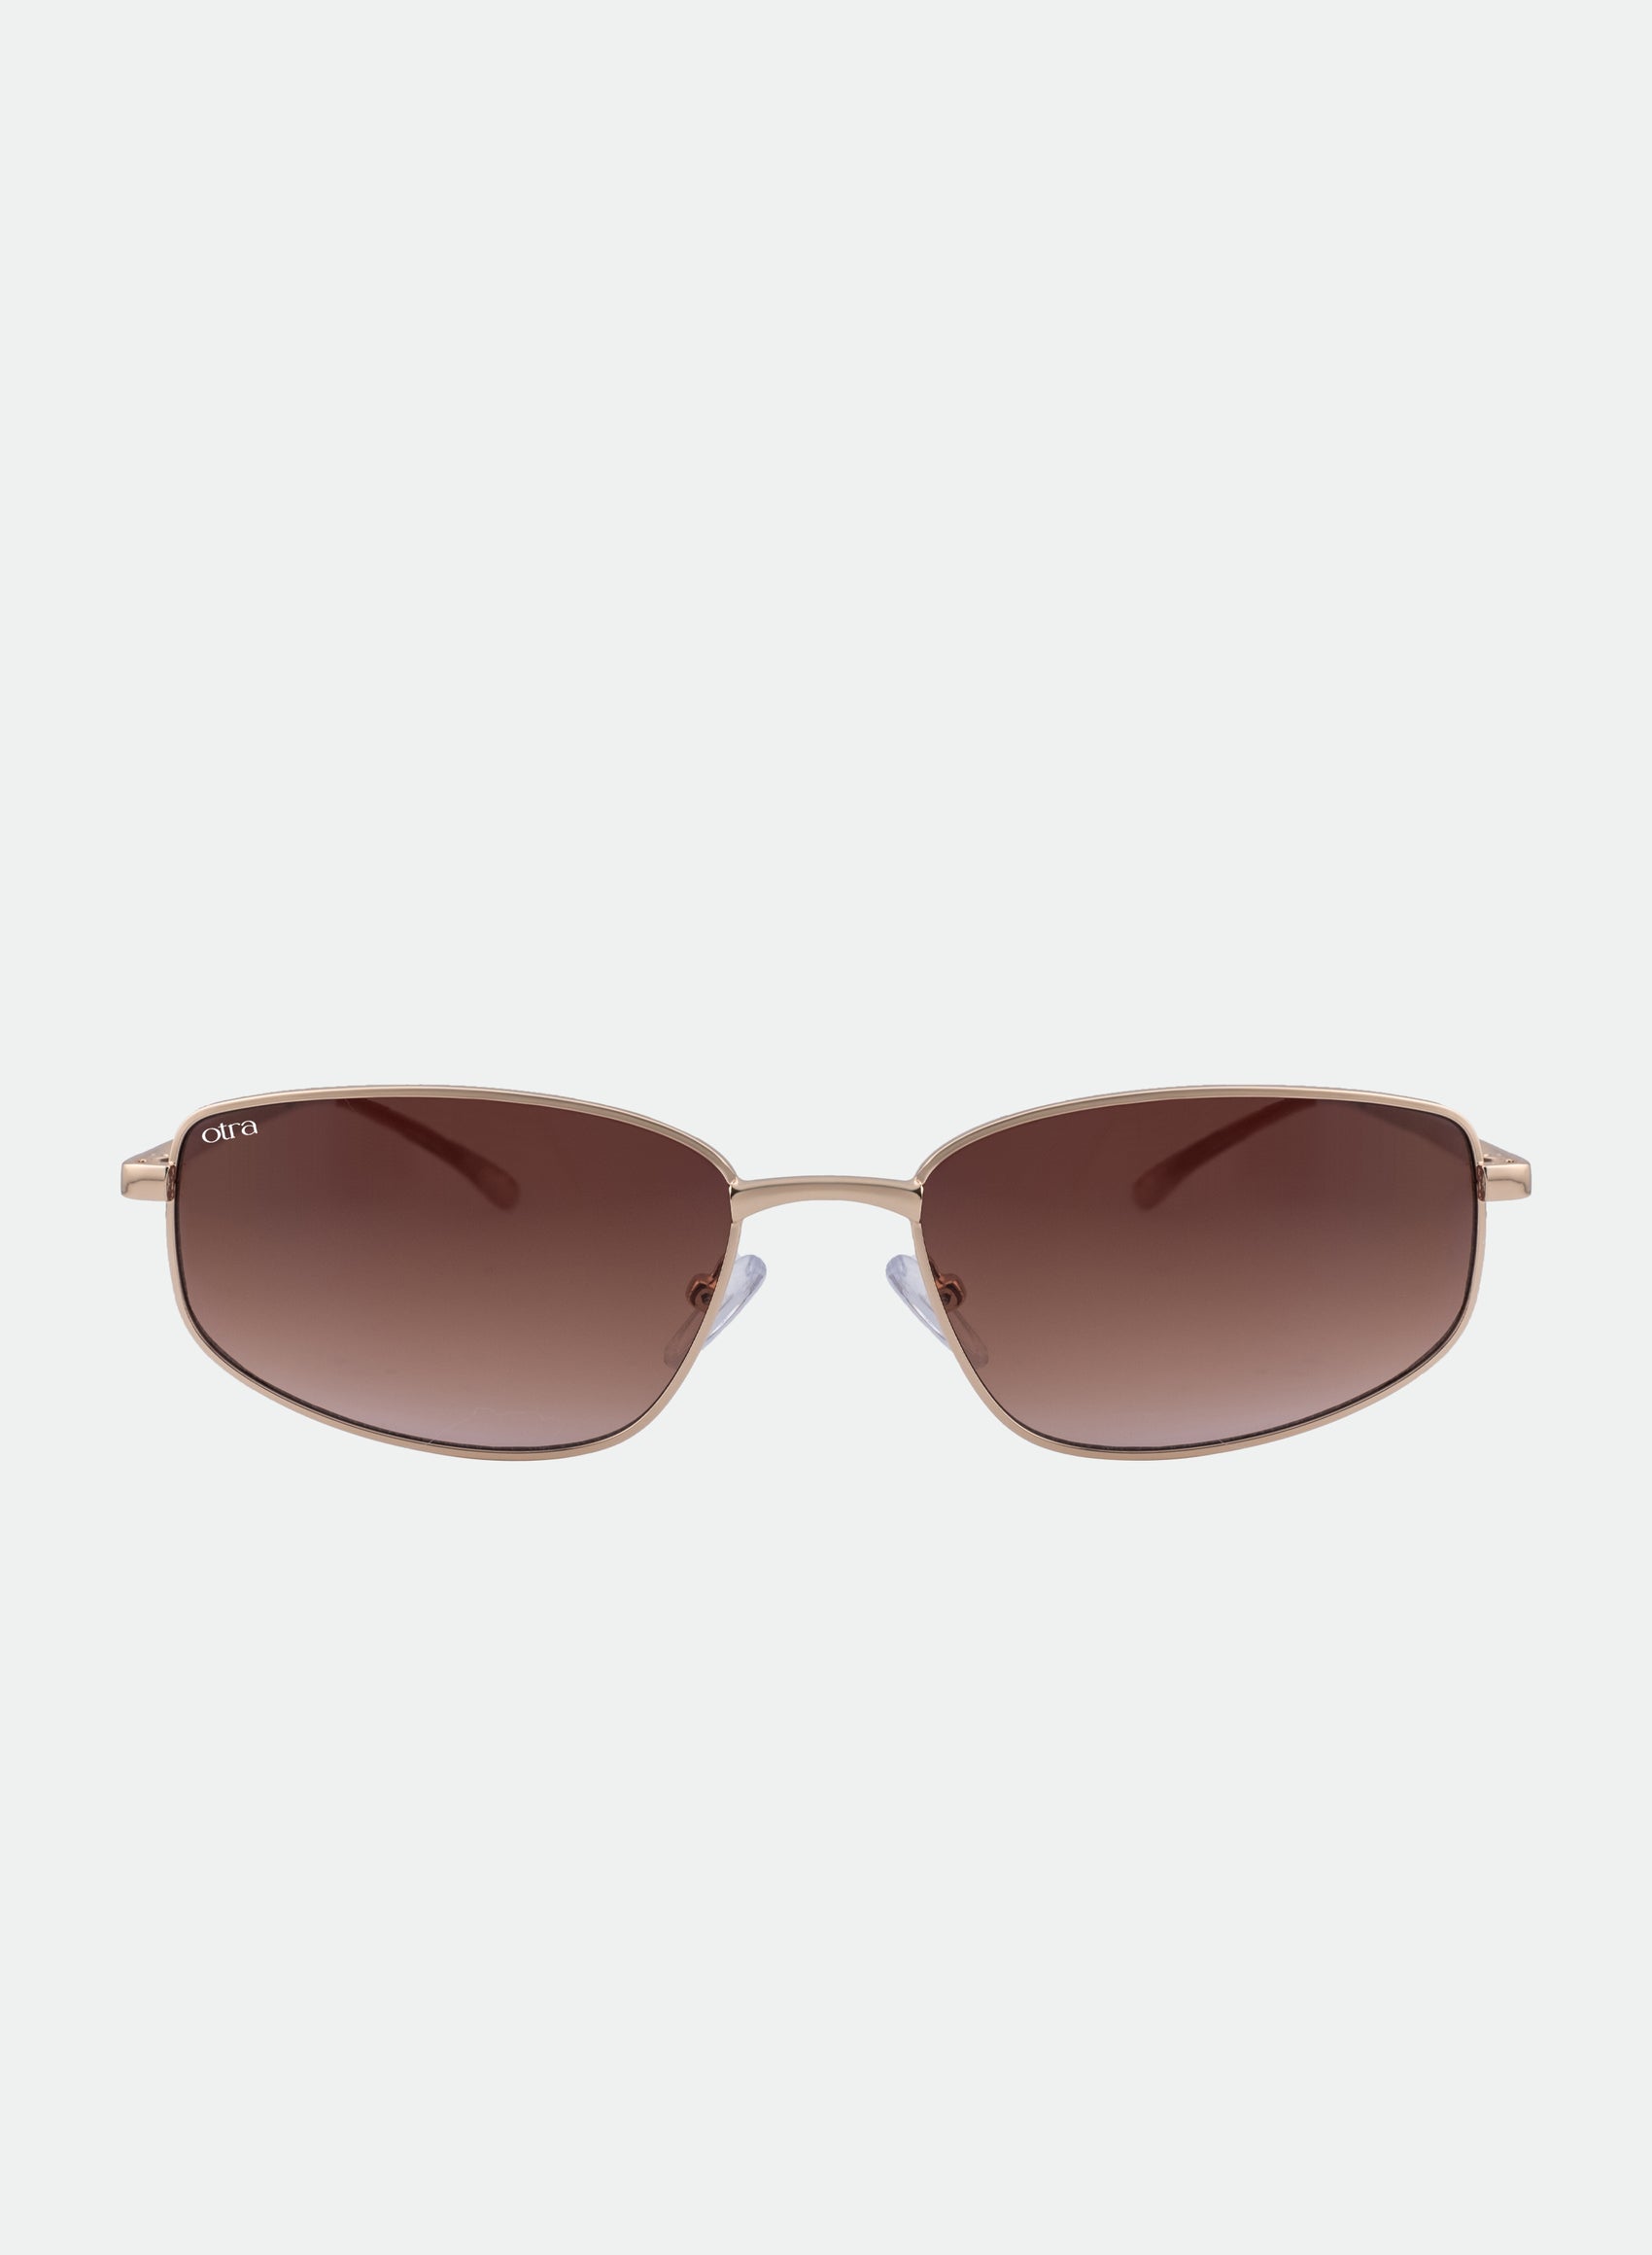 Willow sunglasses in brown